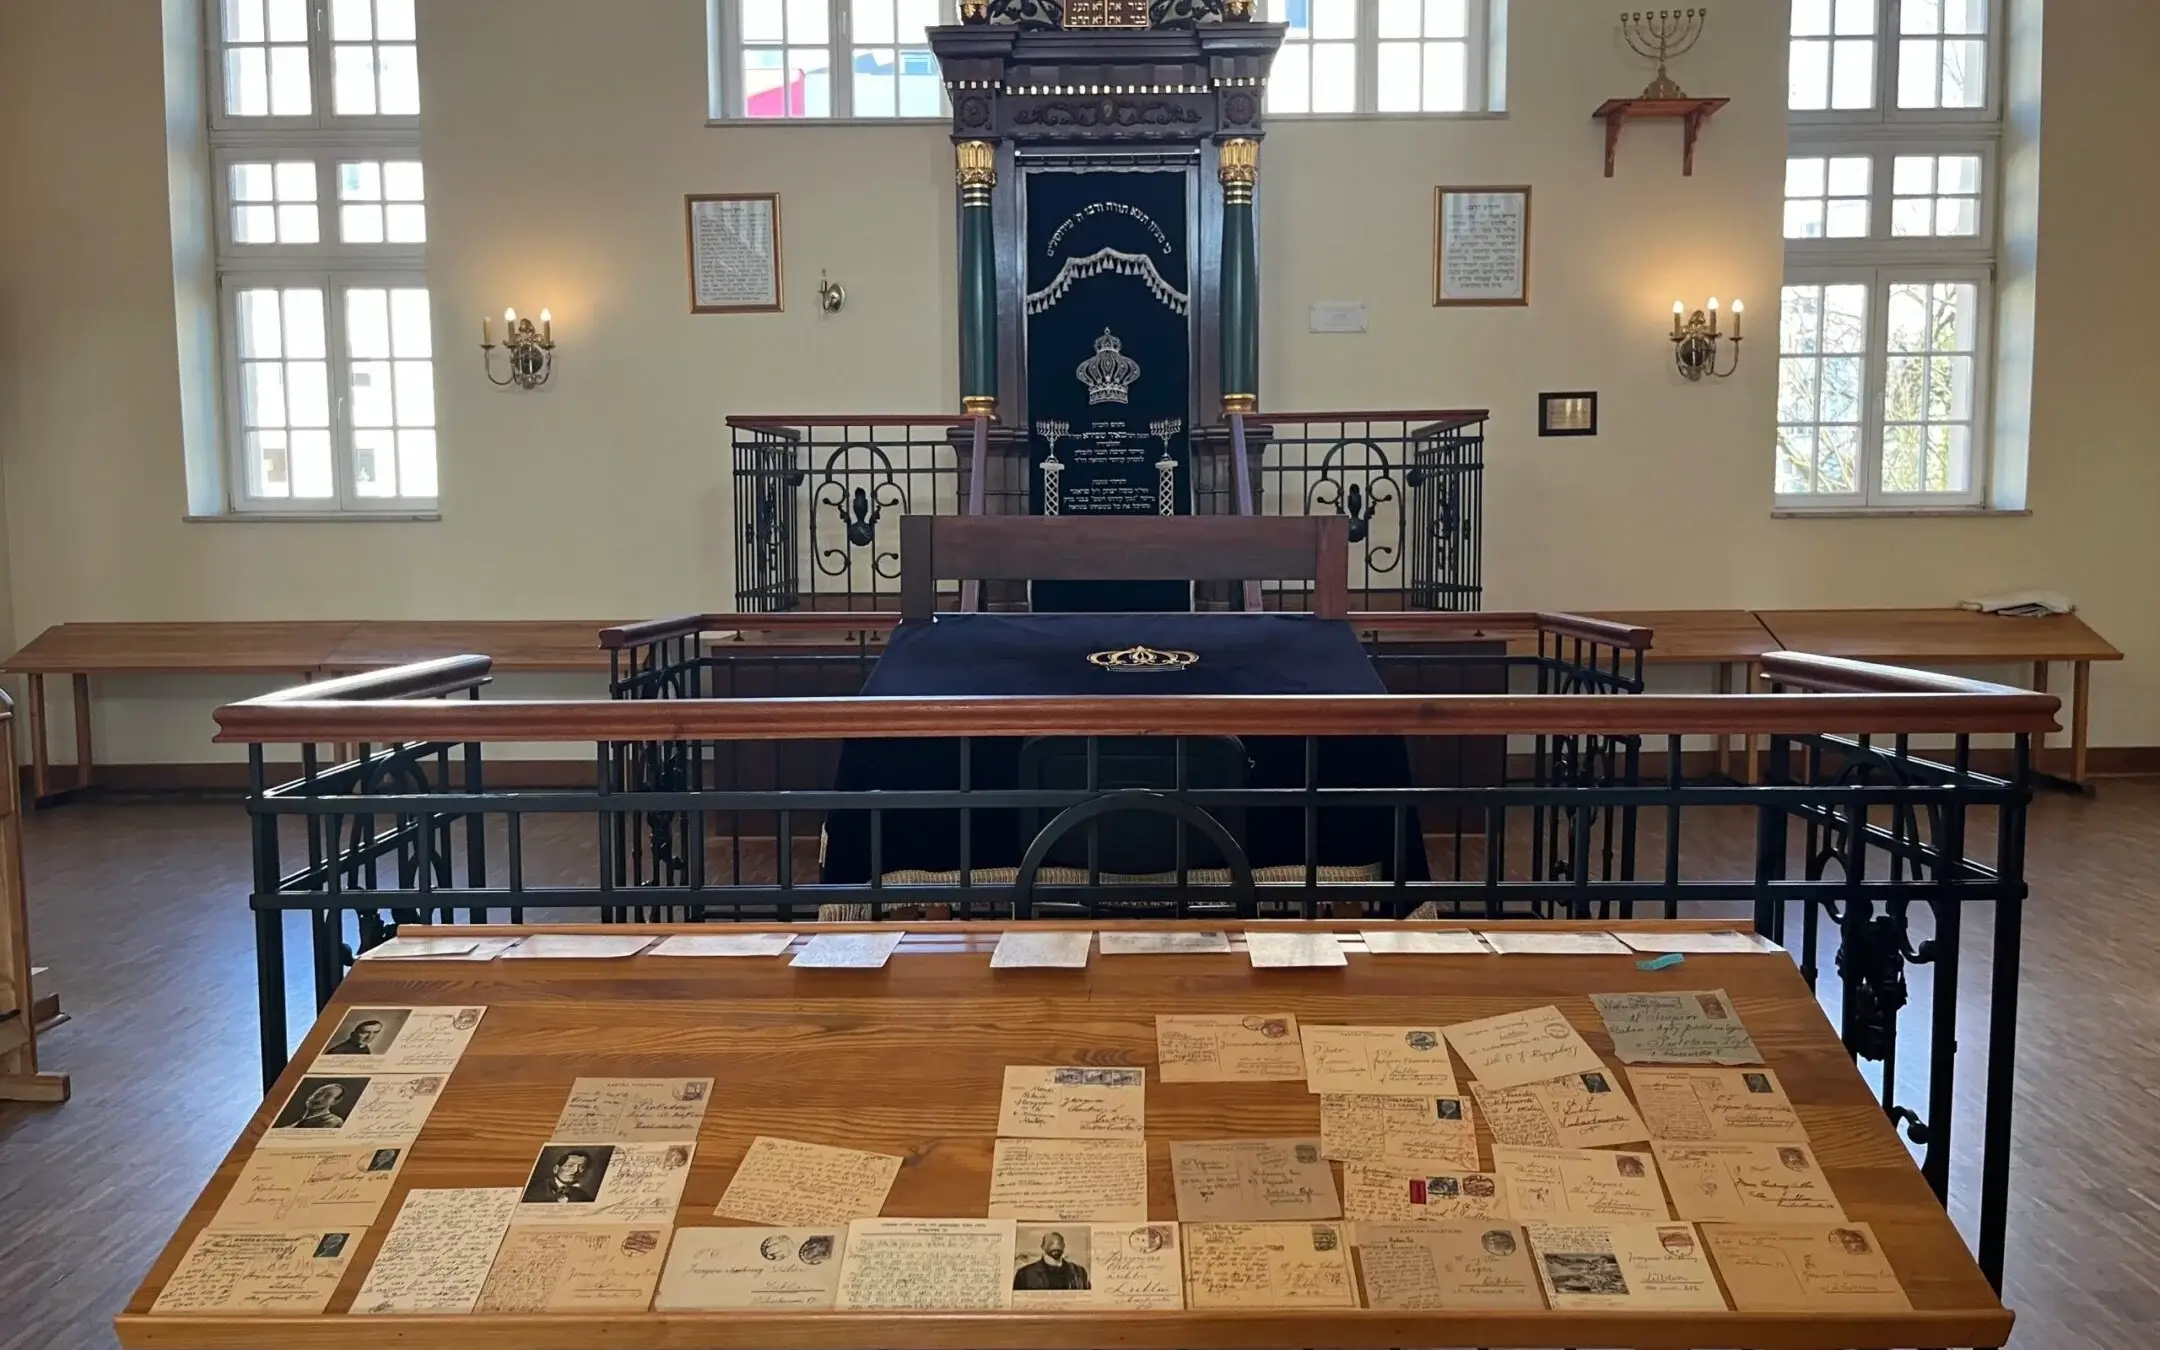 A display of looted postcards inside the former Chachmei Lublin yeshiva.